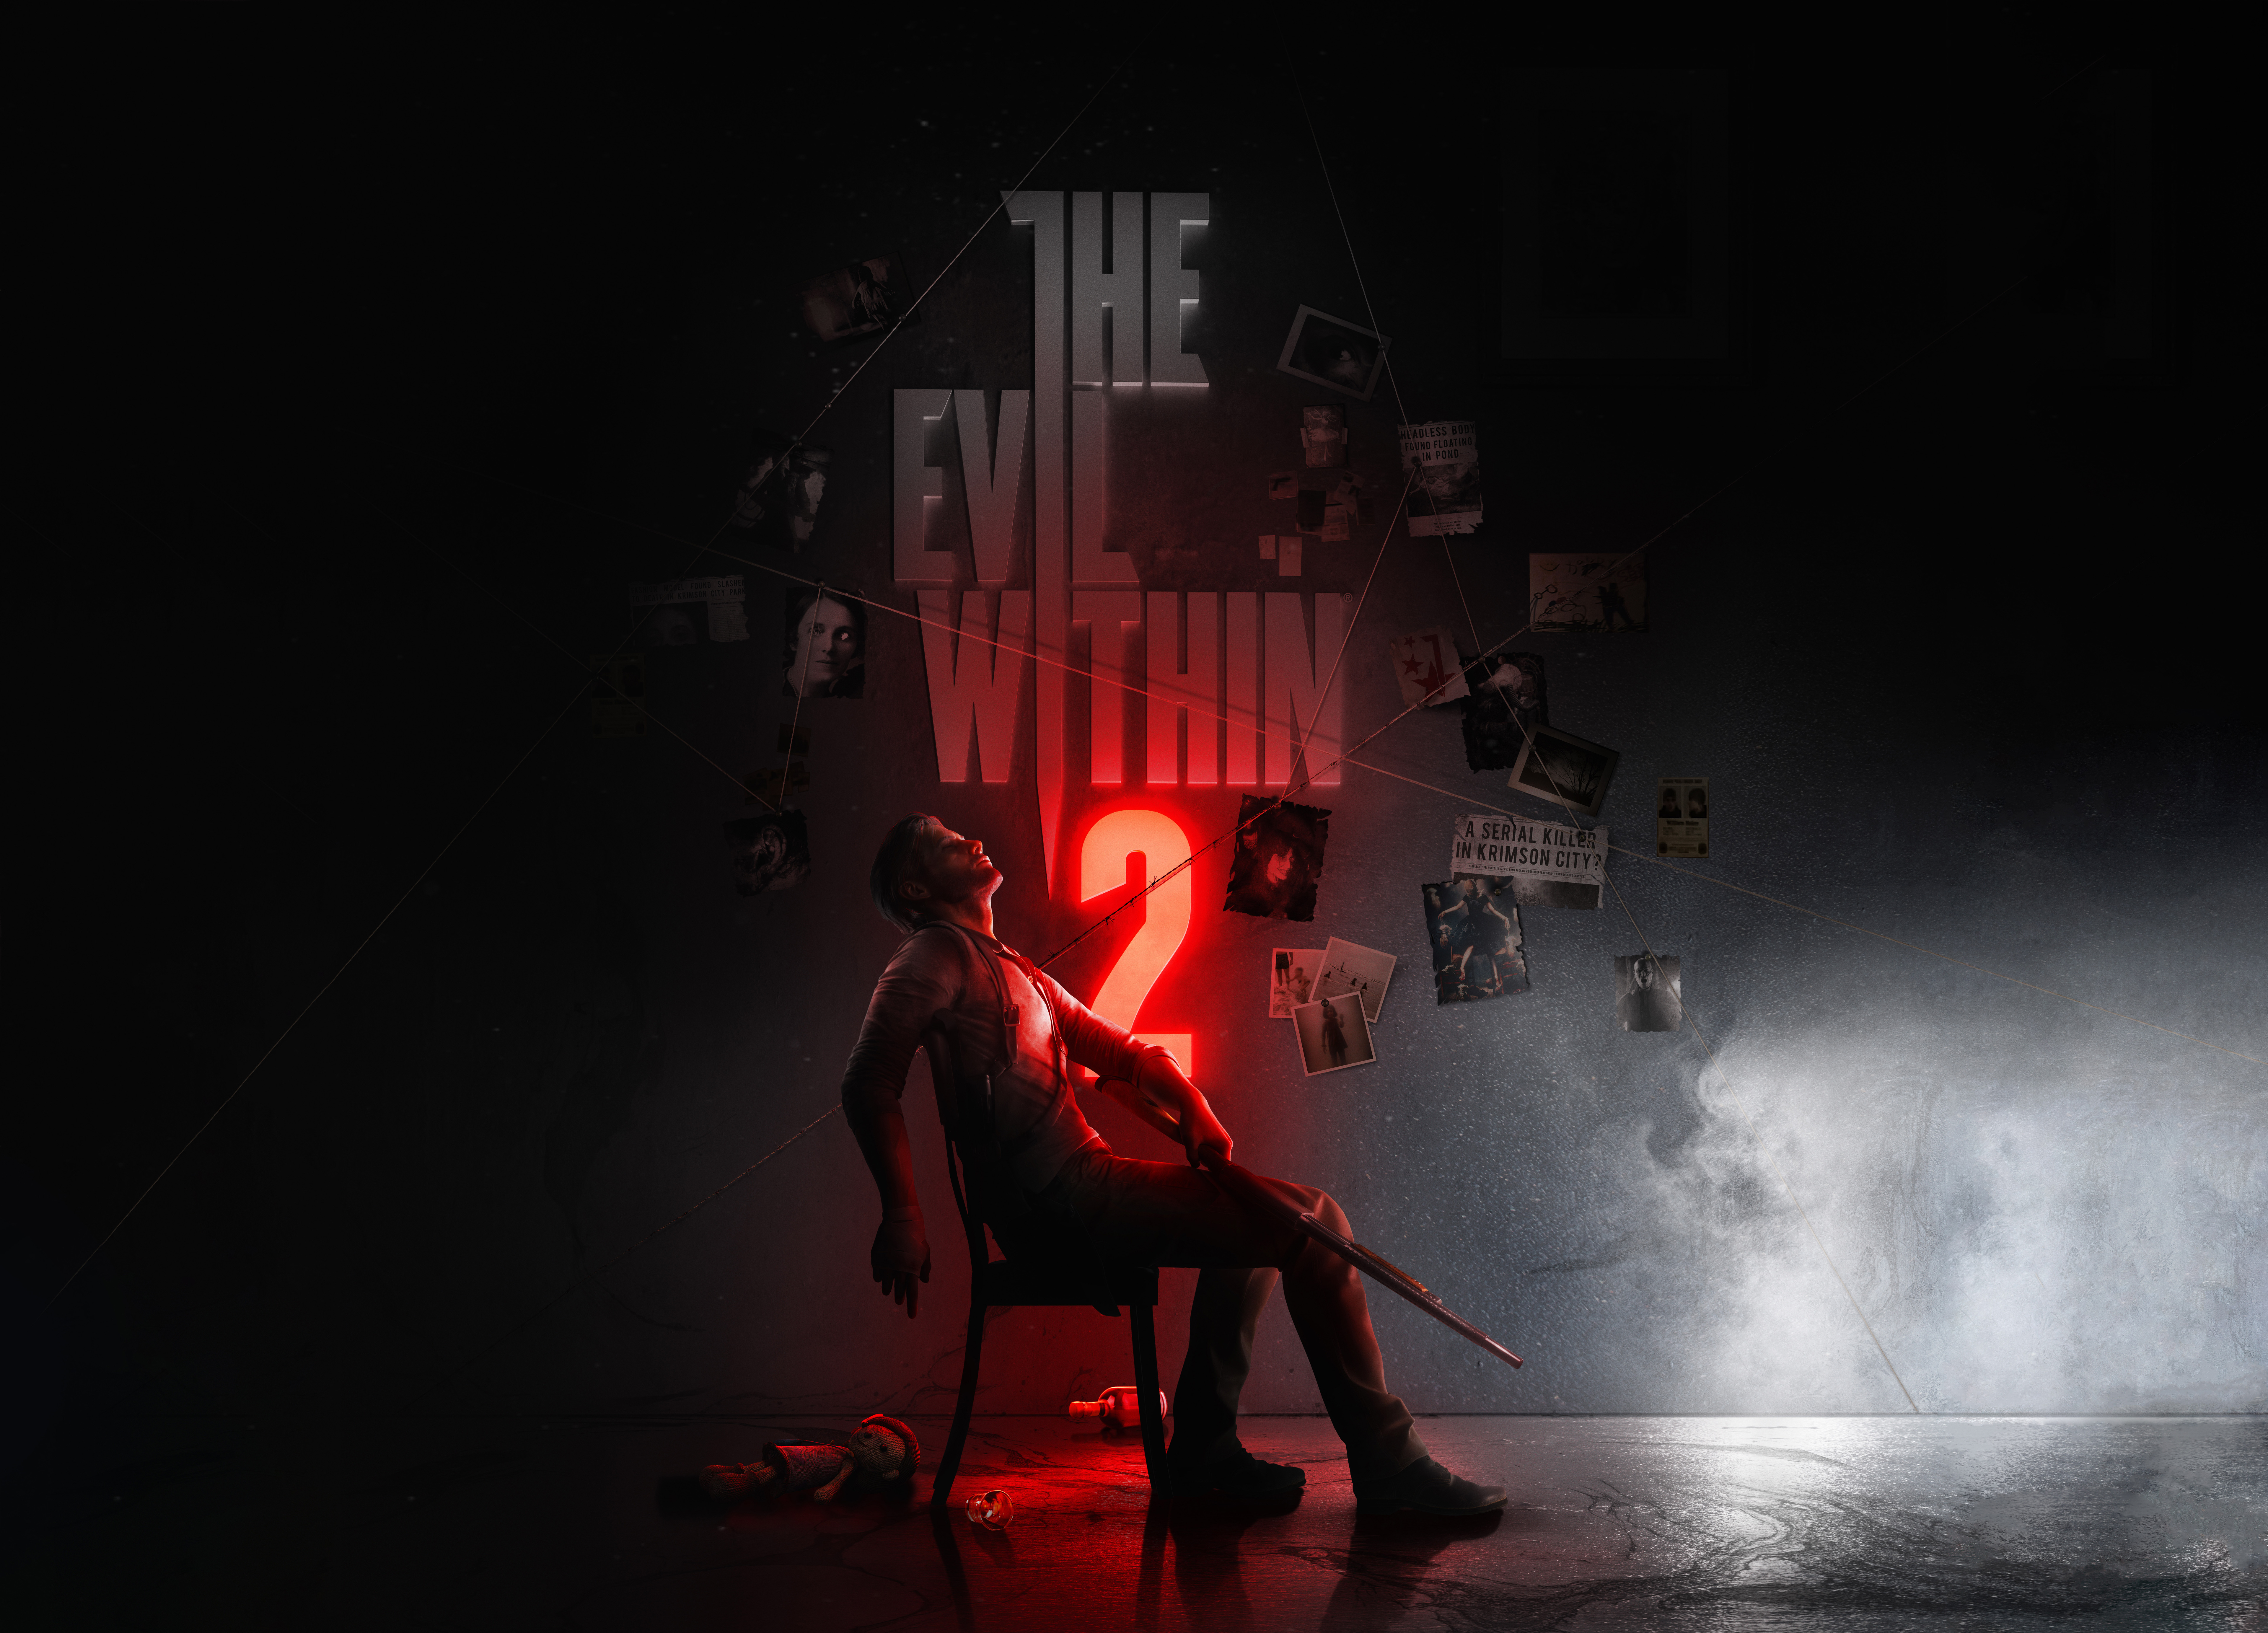 free download the evil within ps3